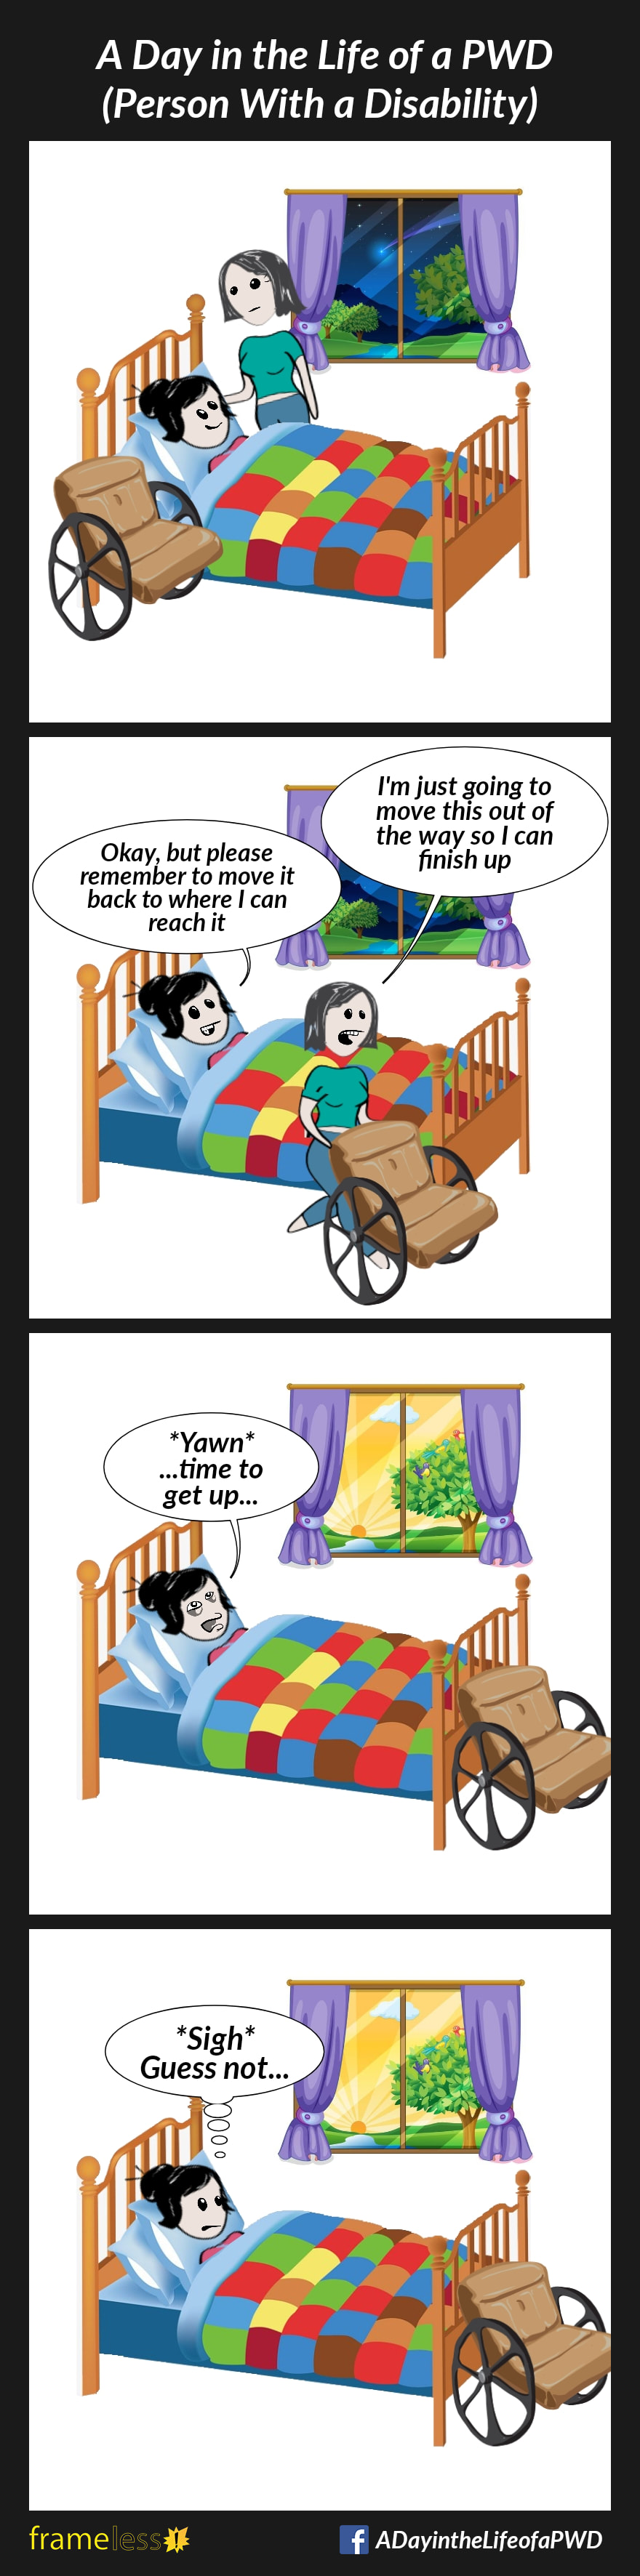 COMIC STRIP 
A Day in the Life of a PWD (Person With a Disability) 

Frame 1:
A woman is being helped at bedtime by her carer. Her wheelchair is beside her bed.

Frame 2:
The carer moves the woman's wheelchair.
CARER: I'm just going to move this out of the way so I can finish up
WOMAN: Okay, but please remember to move it back to where I can reach it

Frame 3:
The next morning, the woman wakes up.
WOMAN: *Yawn*...time to get up...

Frame 4:
The woman sees that her chair is not next to her where it should be.
WOMAN (thinking): *Sigh* Guess not...